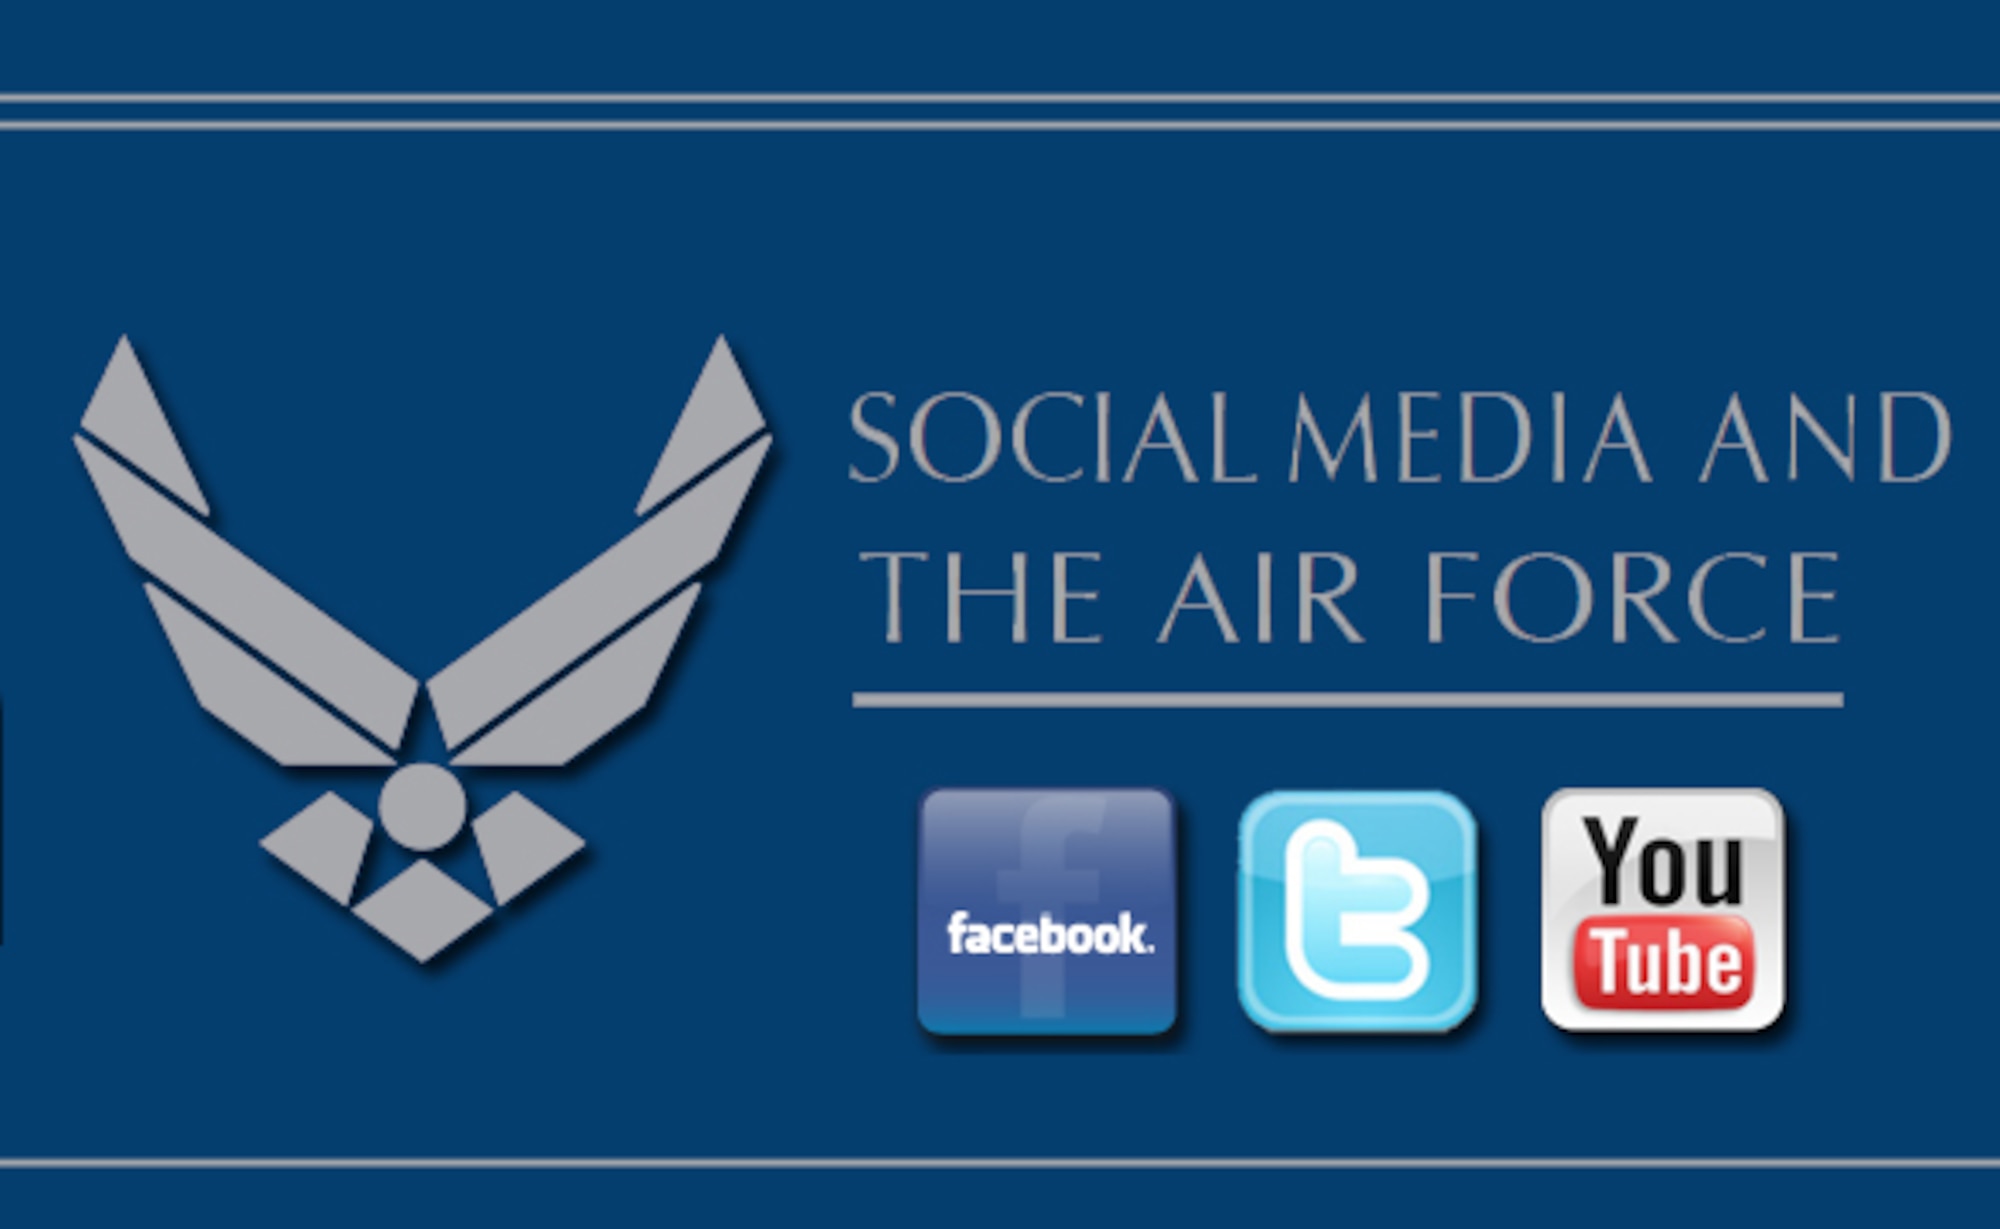 Social Media and the Air Force. (USAF illustration)